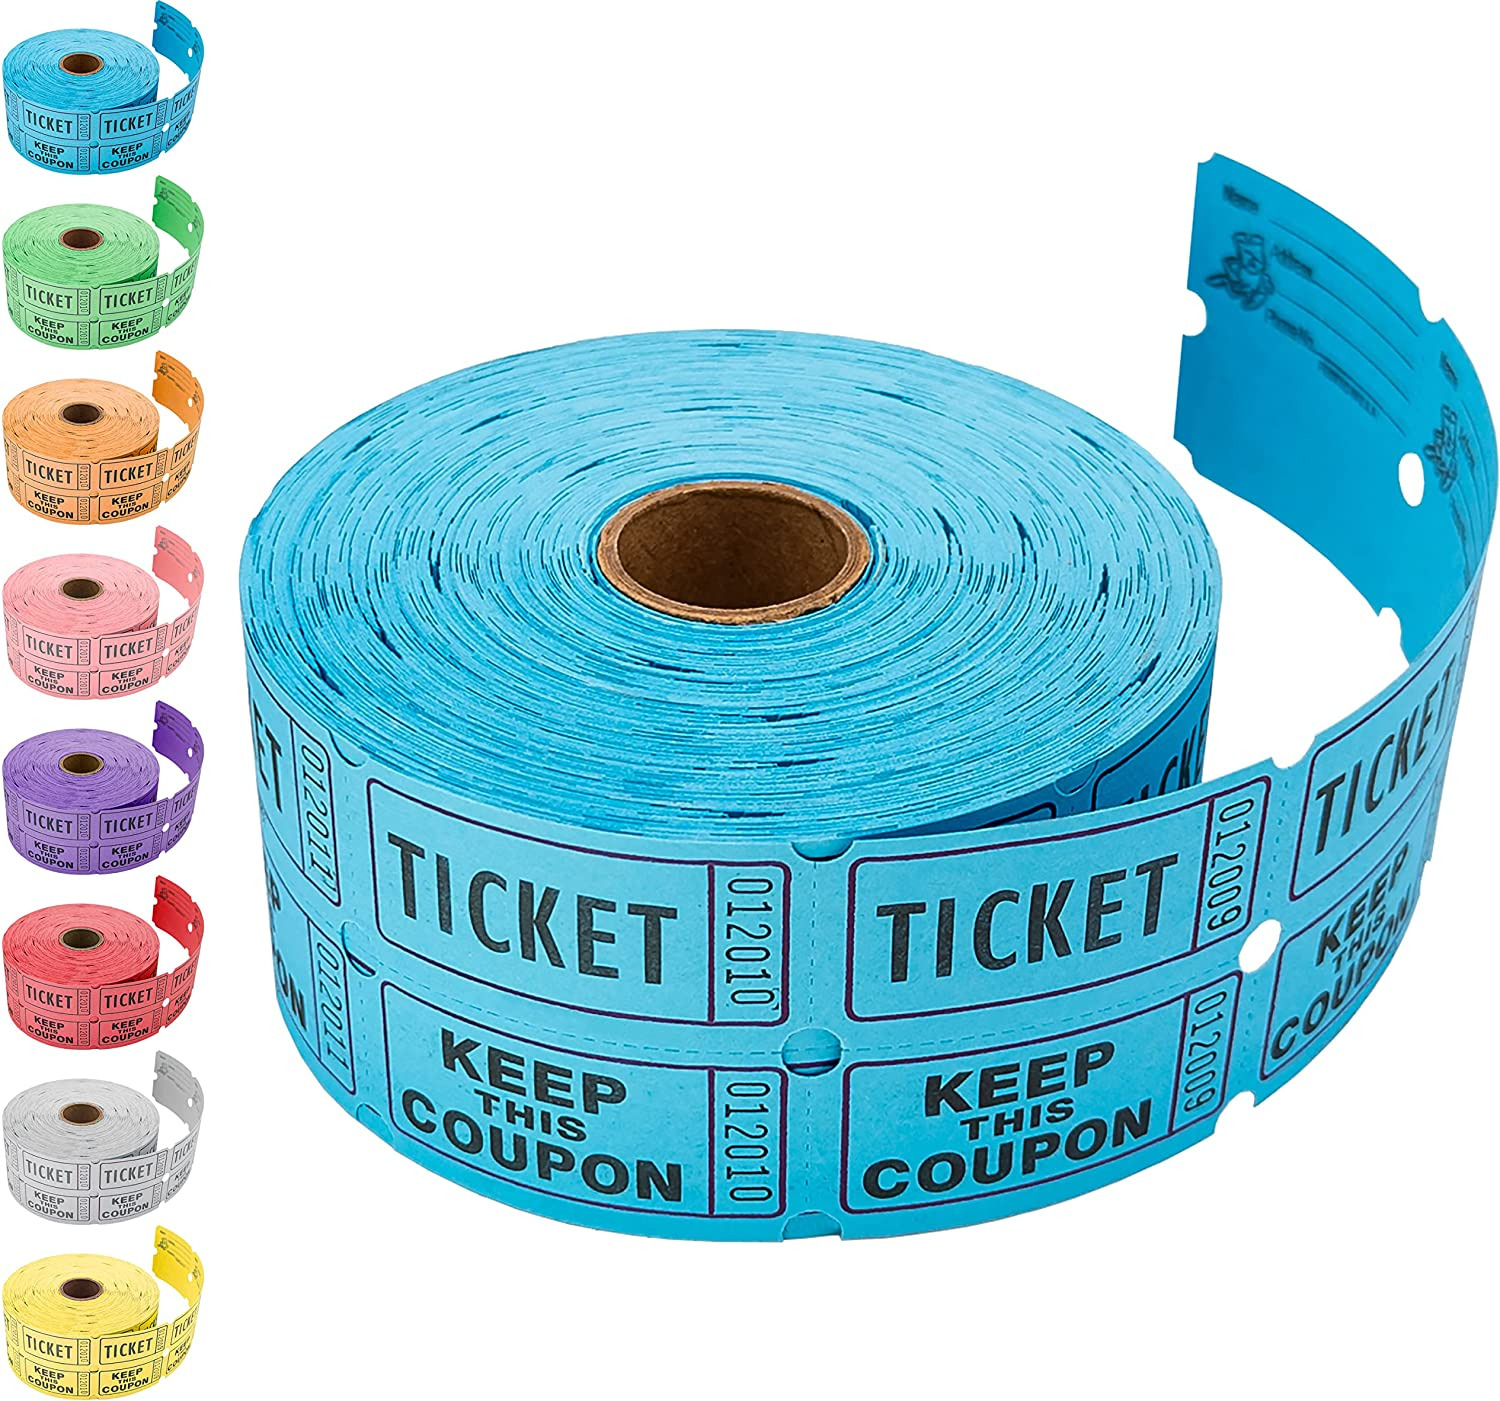 1000 Tickets Blue Raffle For Events, Entry, Class Reward - Double Roll - 2" X 2"